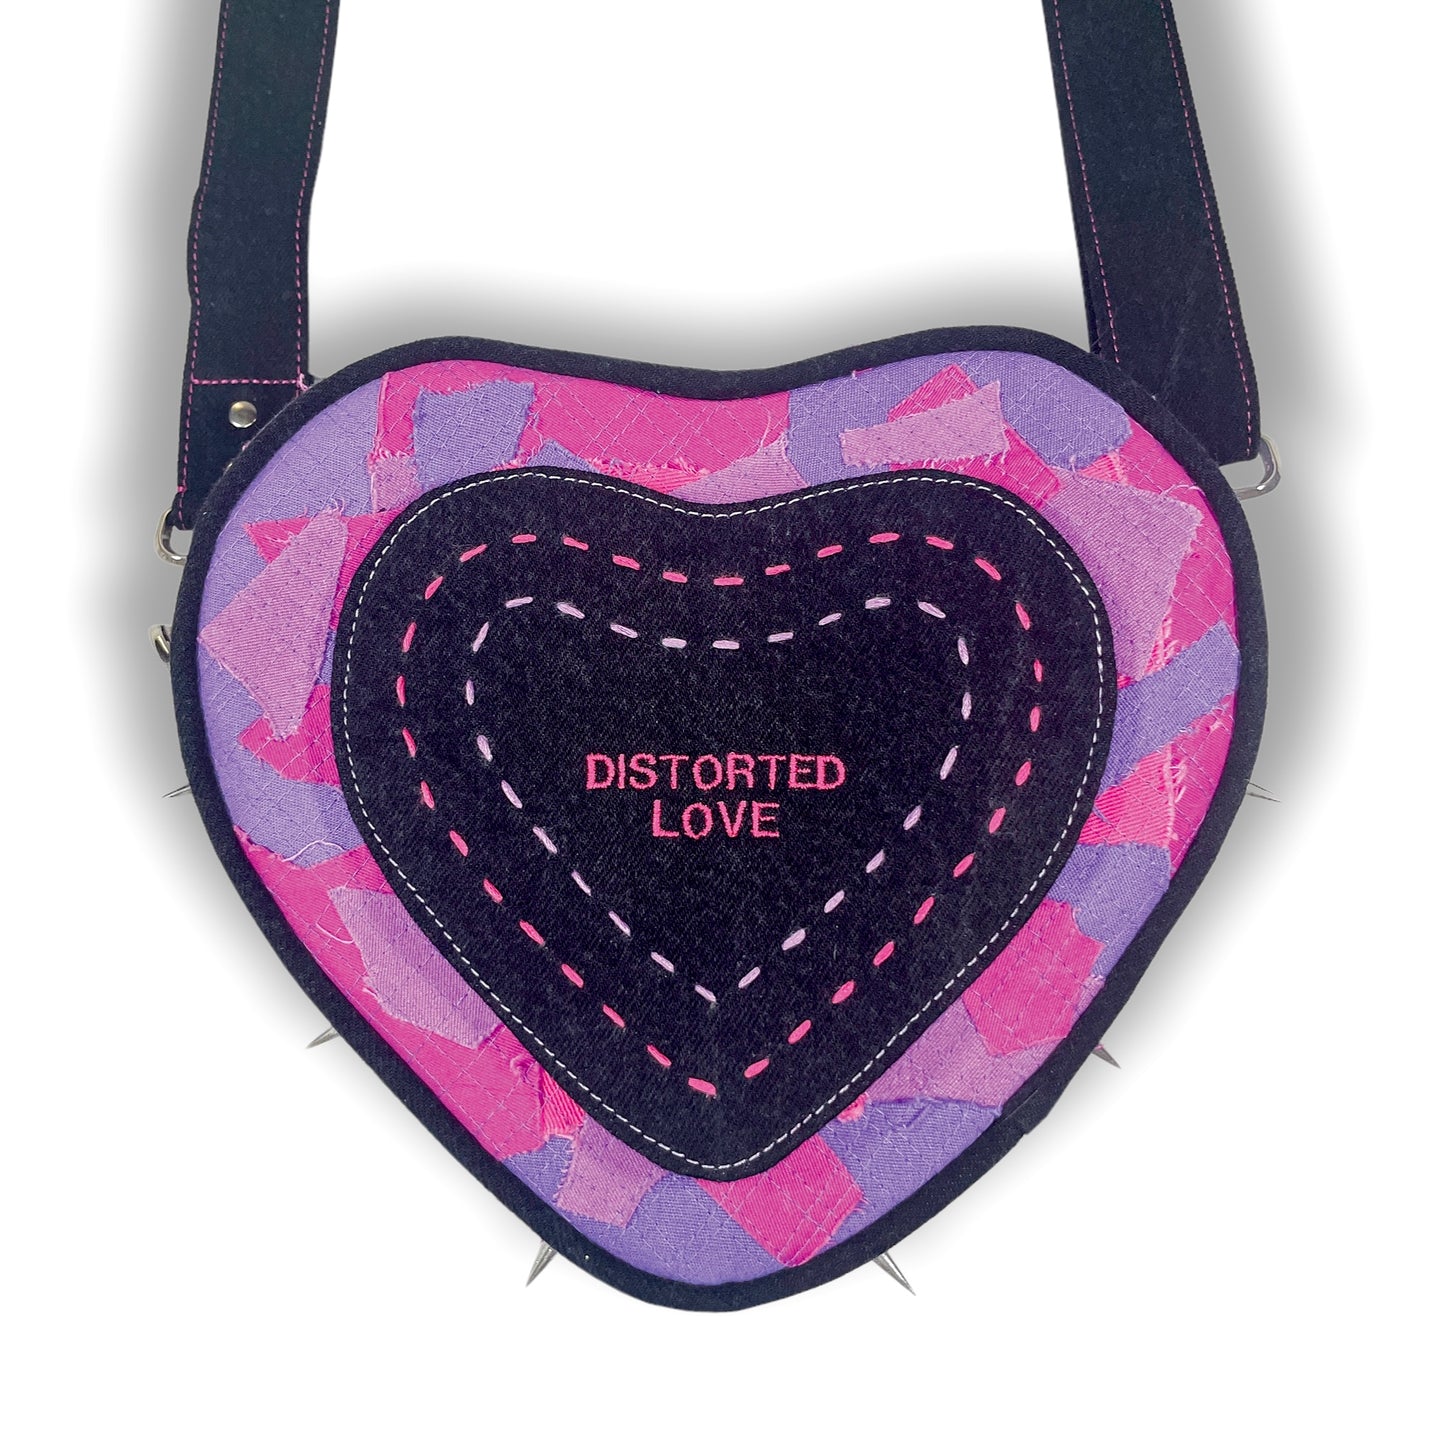 "Distorted Love" Heart Bag 1of1